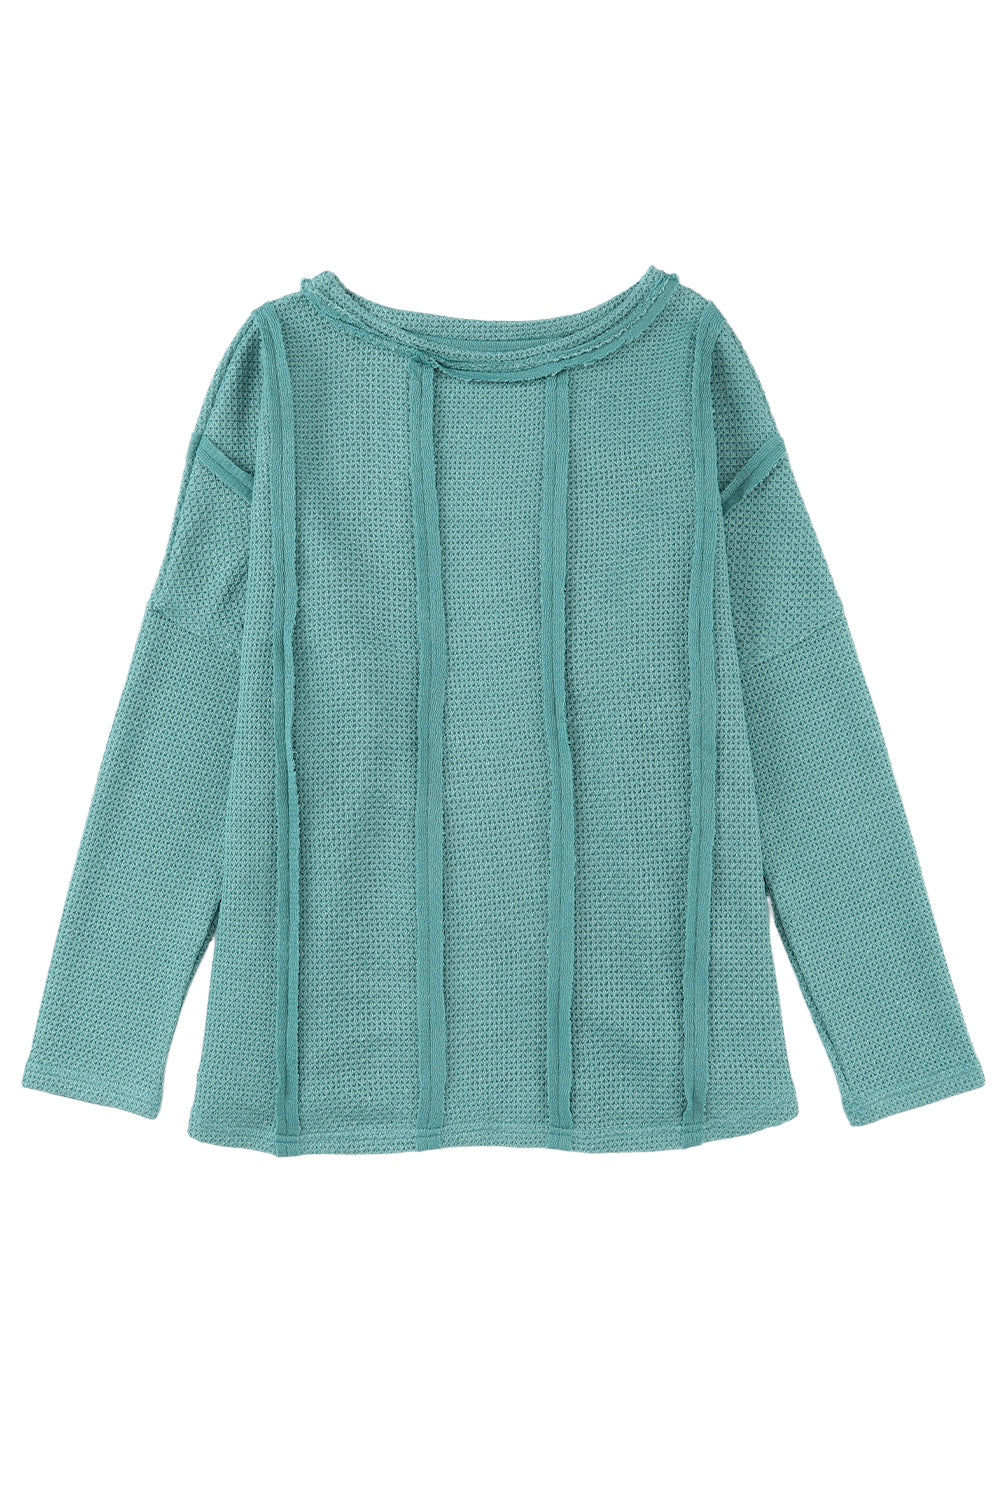 Green Exposed Seam Waffle Knit Loose Top